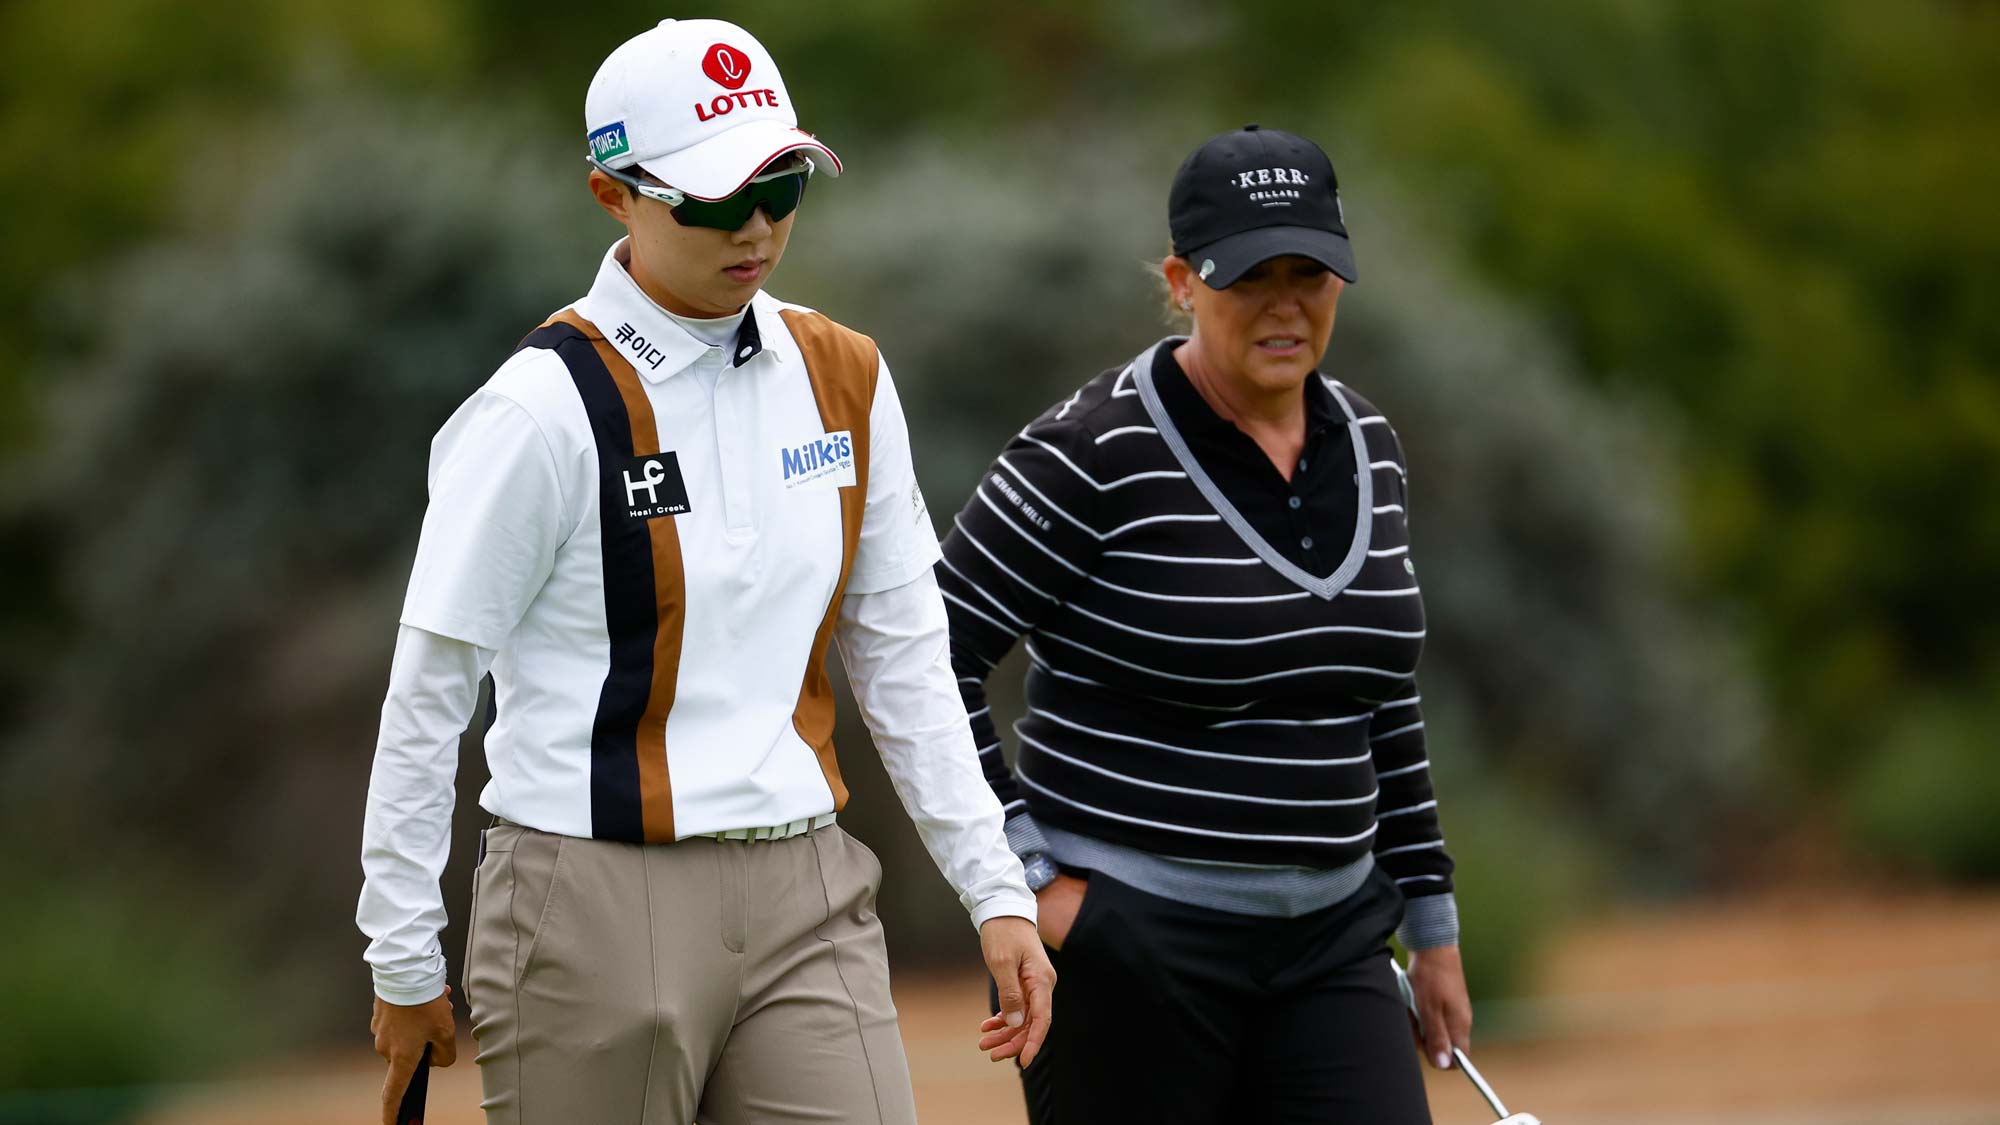 (L-R) Hyo Joo Kim of South Korea and Cristie Kerr of the United States are seen on the 12th green during the second round of the DIO Implant LA Open